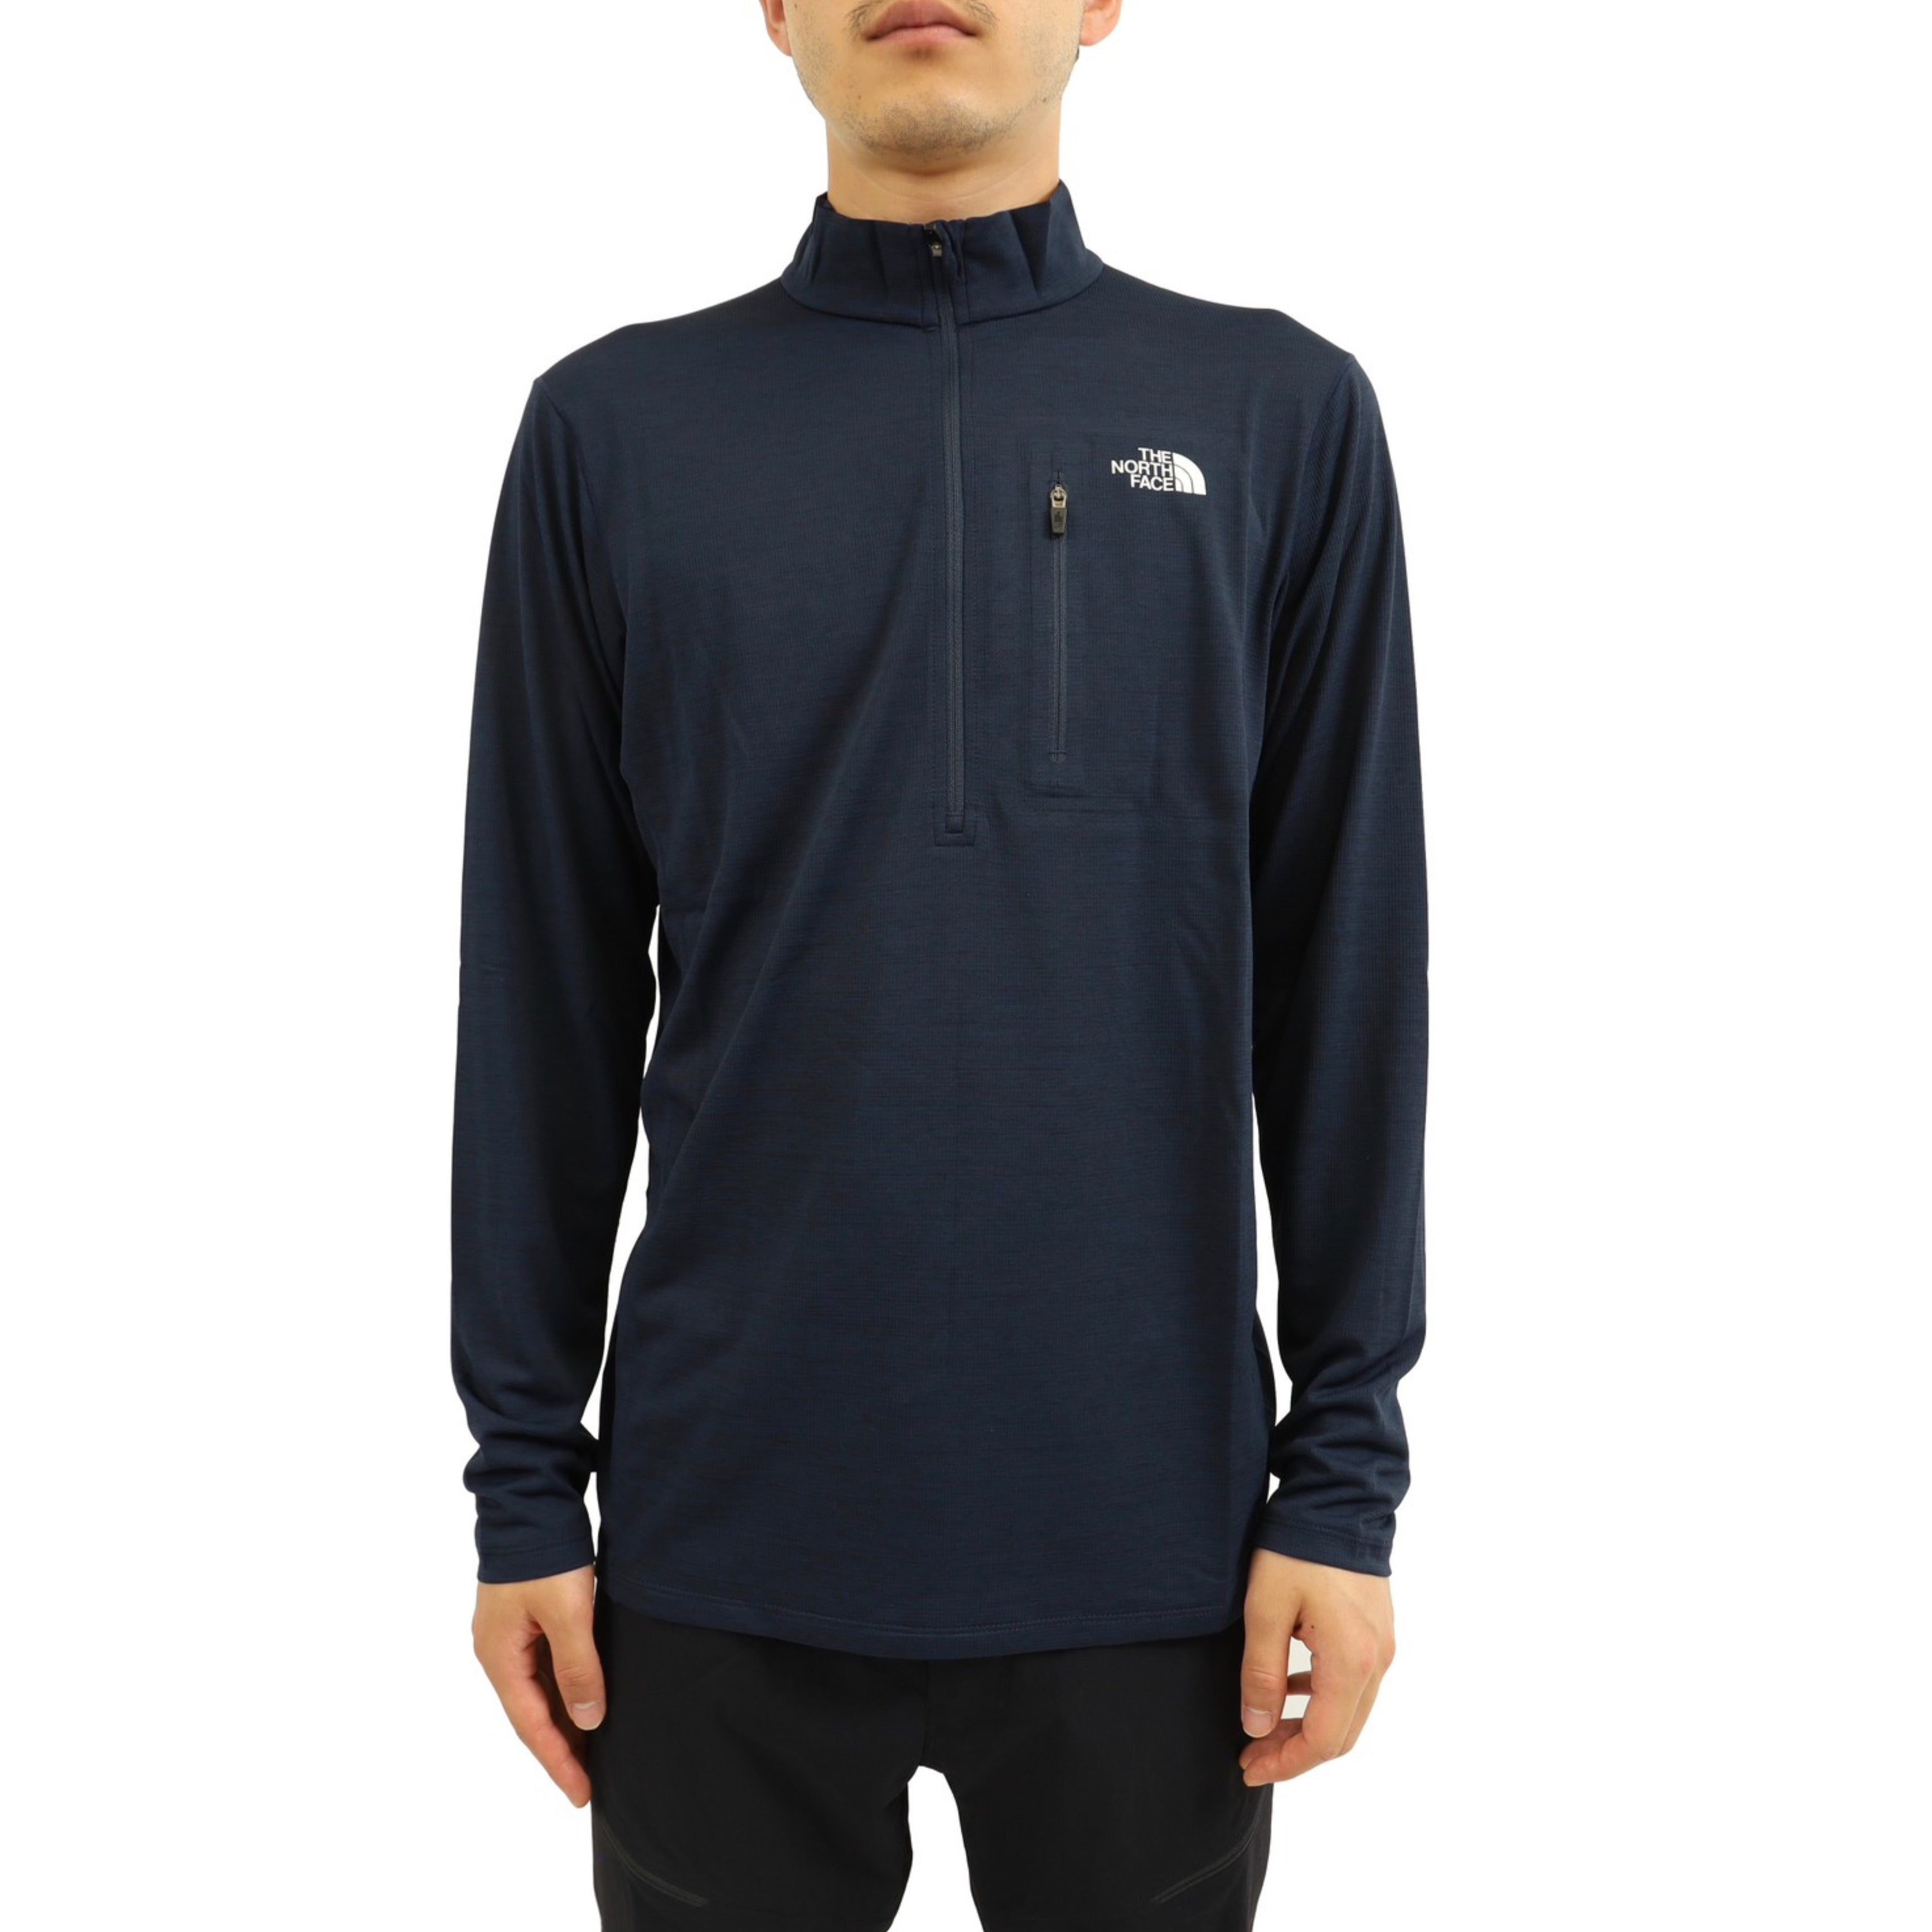 THE NORTH FACE】LS Flashdry 3D Zip Upthe north face flashdry